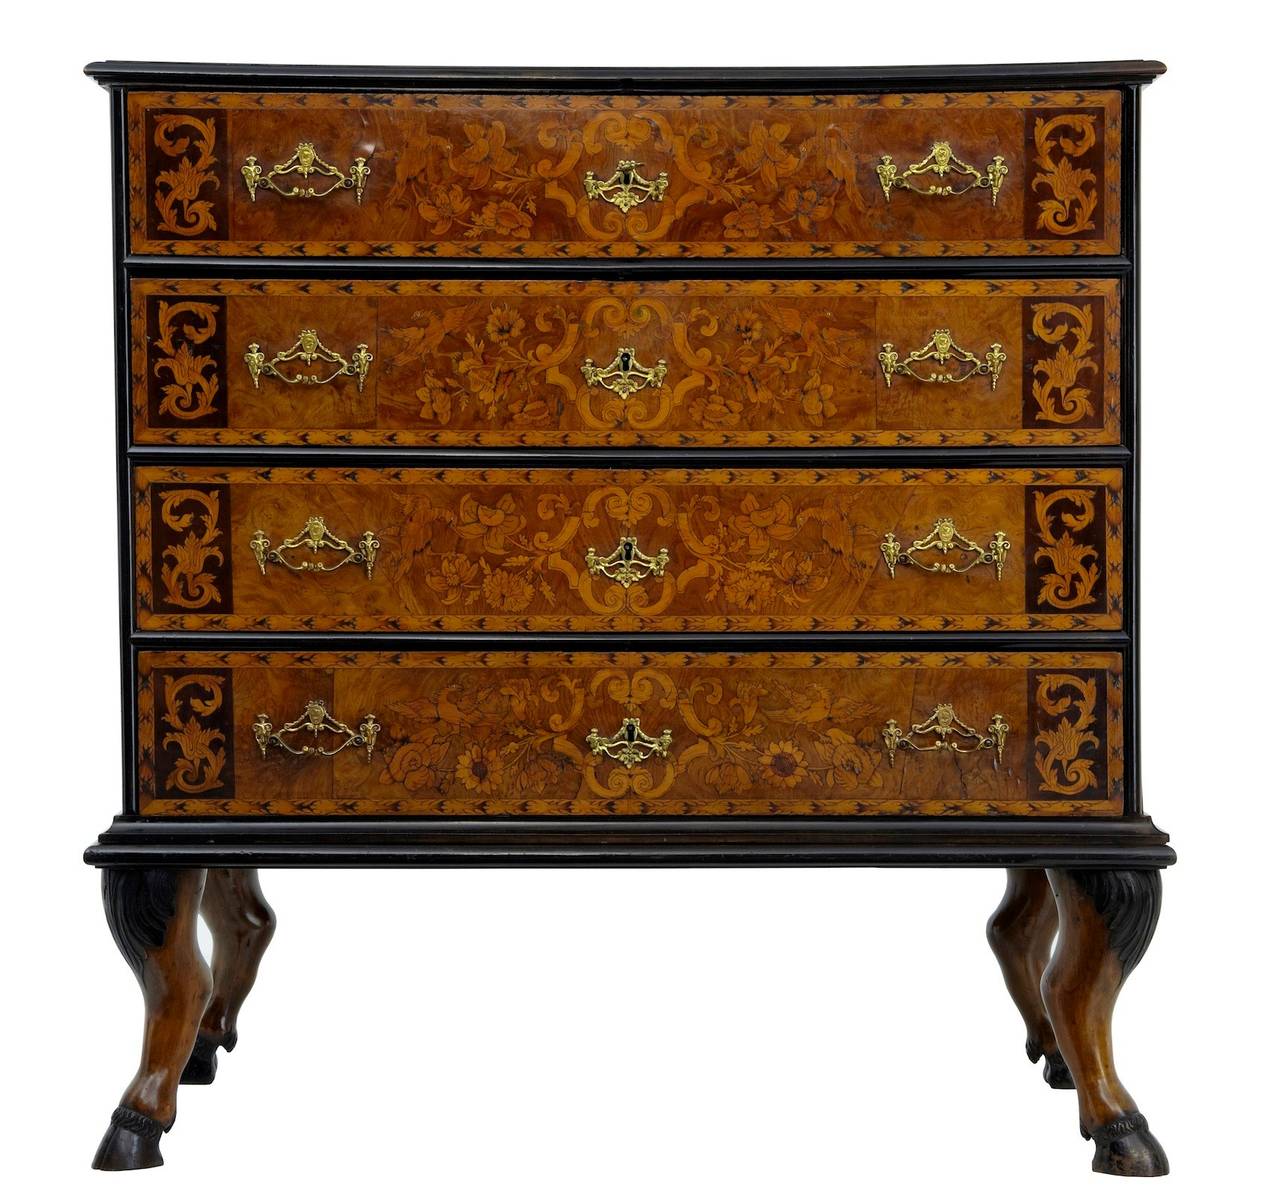 Early 19th century and later continental Marquetry chest on stand
Stunning early 19th century chest, circa 1800 on later 19th century stand.
Rare floral marquetry four drawer chest of drawers, profusely inlaid with walnut, ebony, boxwood and